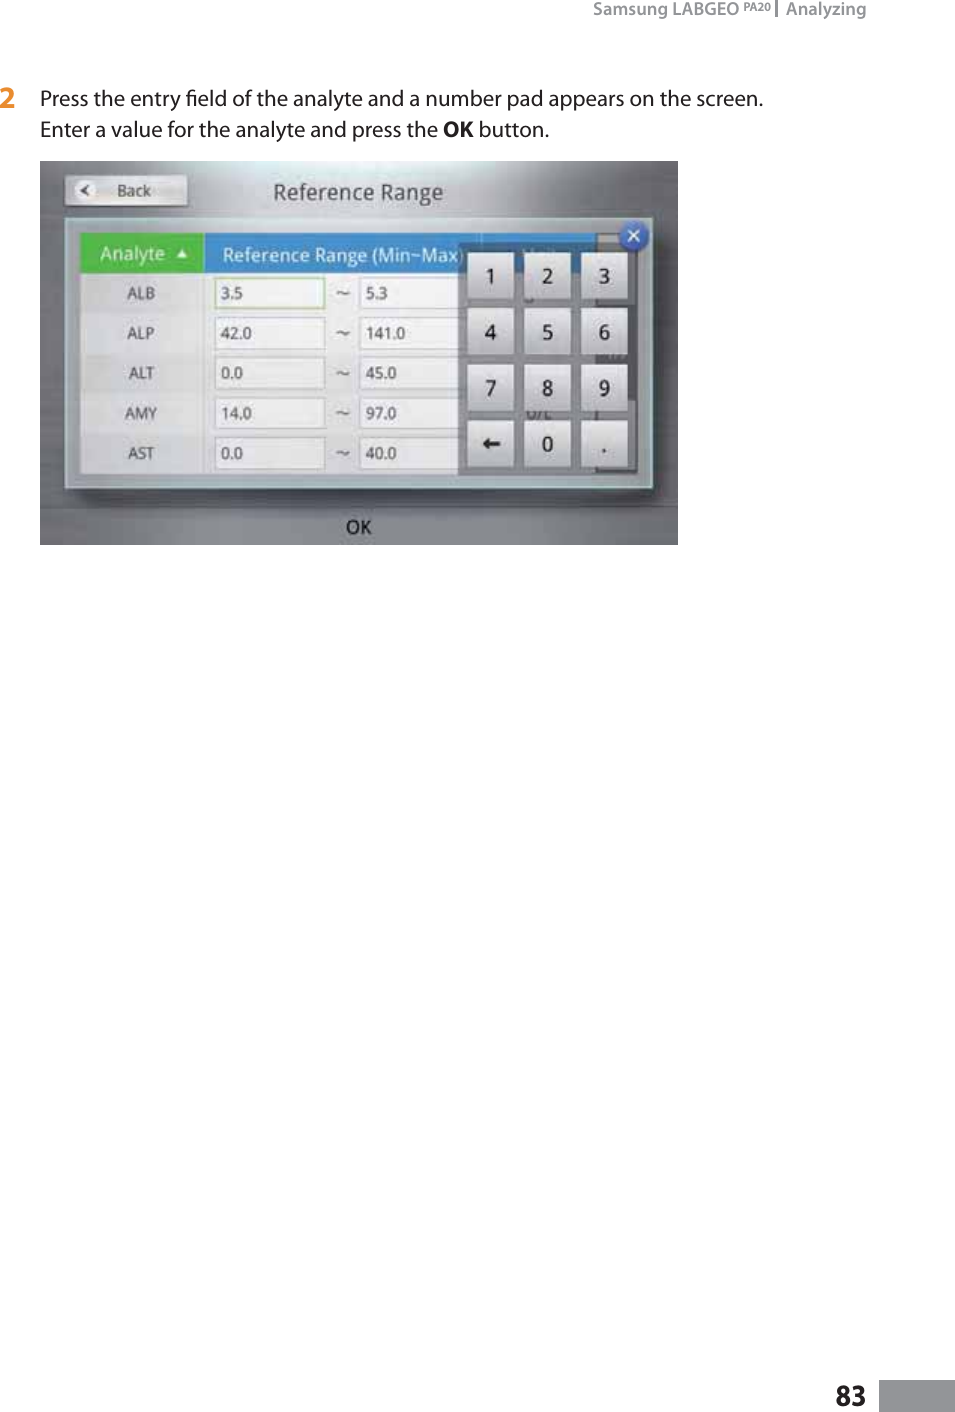 83Samsung LABGEO PA20   Analyzing2  Press the entry eld of the analyte and a number pad appears on the screen.Enter a value for the analyte and press the OK button.